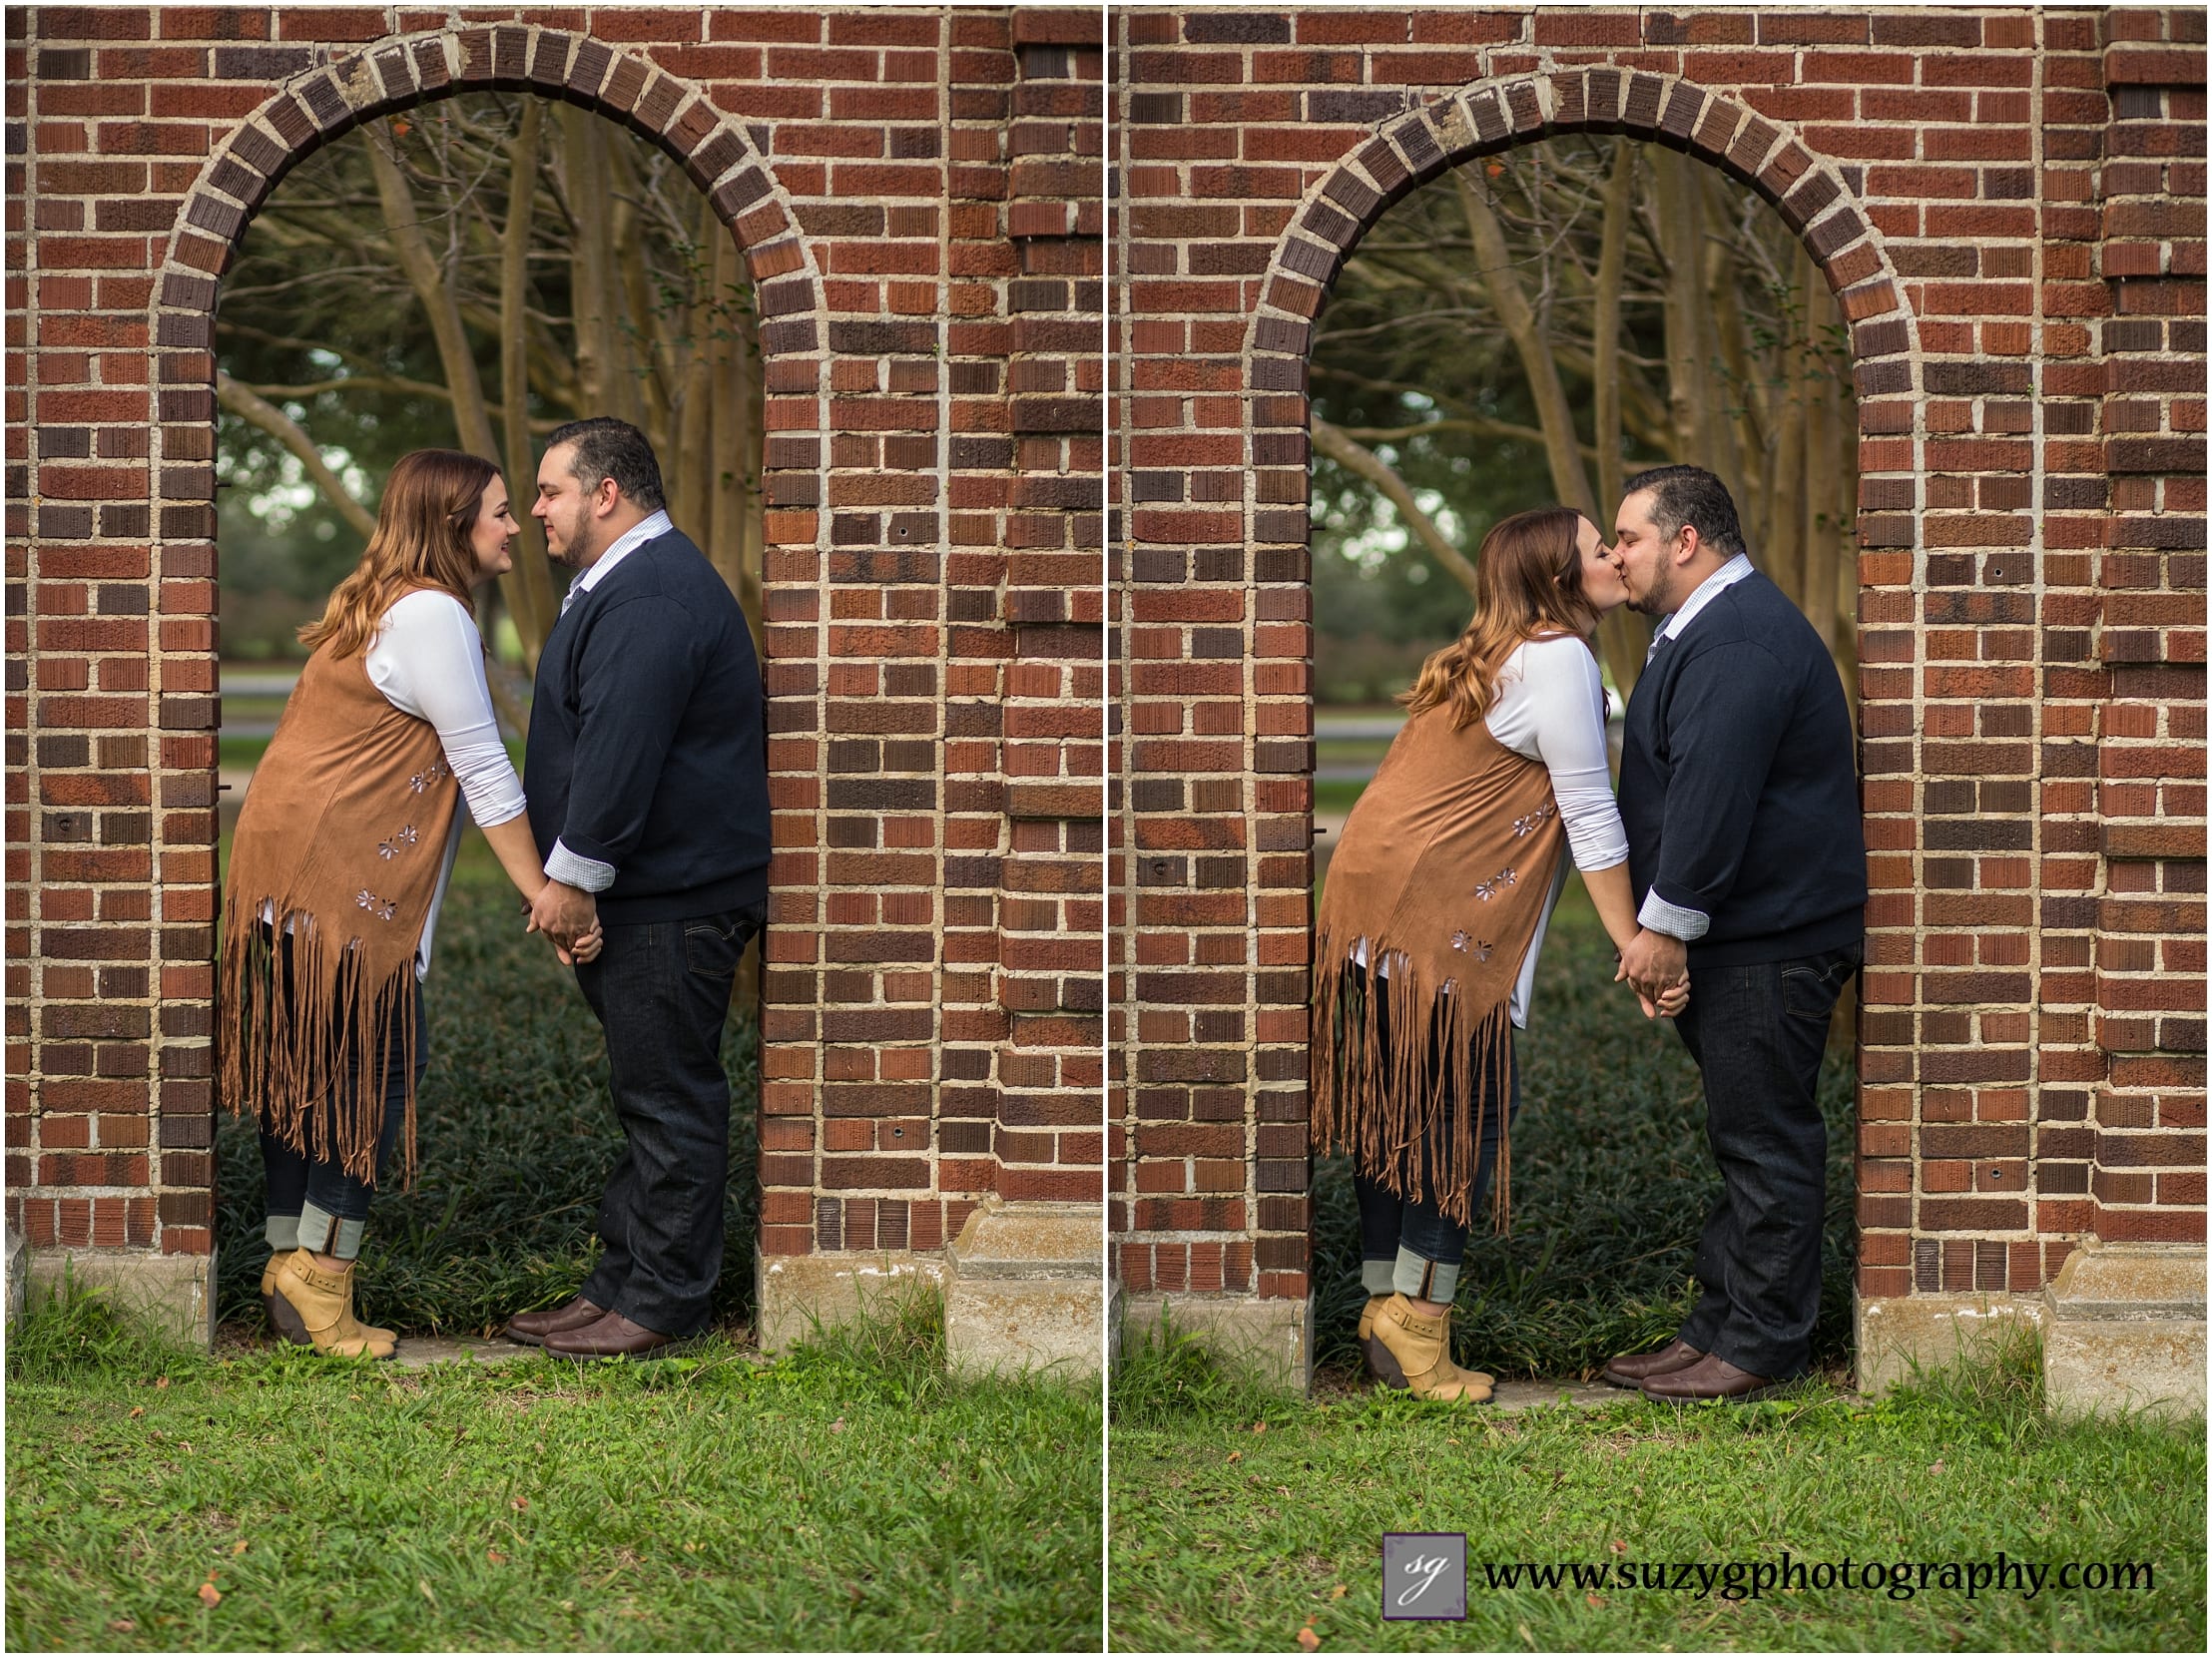 Engagement Session- New Orleans-louisiana wedding photographer-wedding photography-suzy-g-photography-weddings_0023 (2)